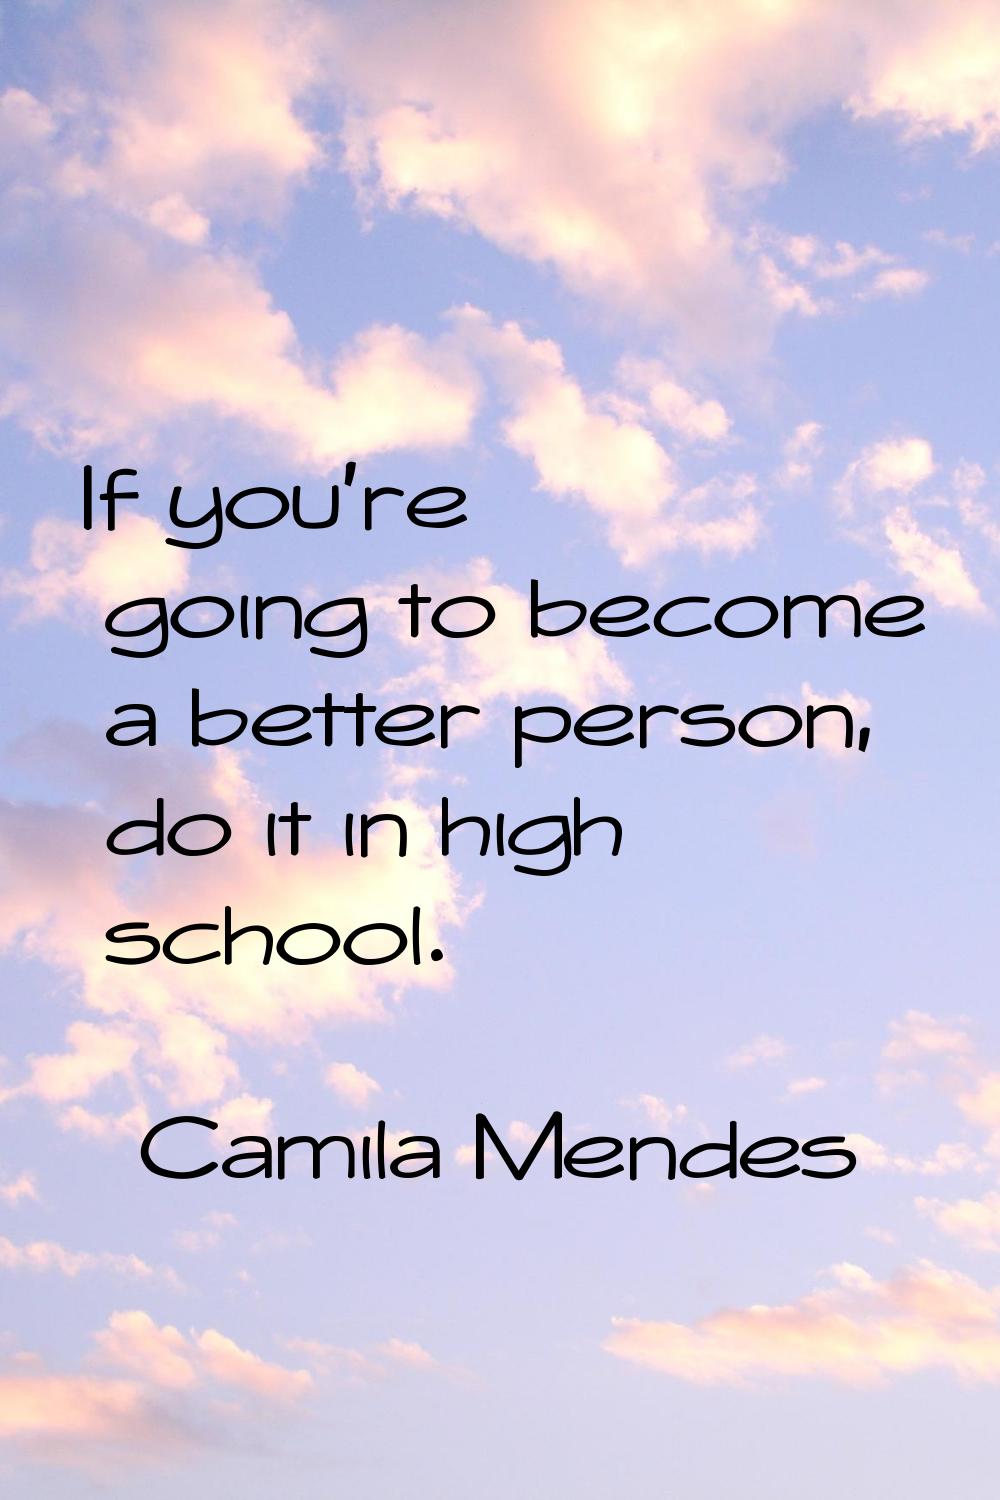 If you're going to become a better person, do it in high school.